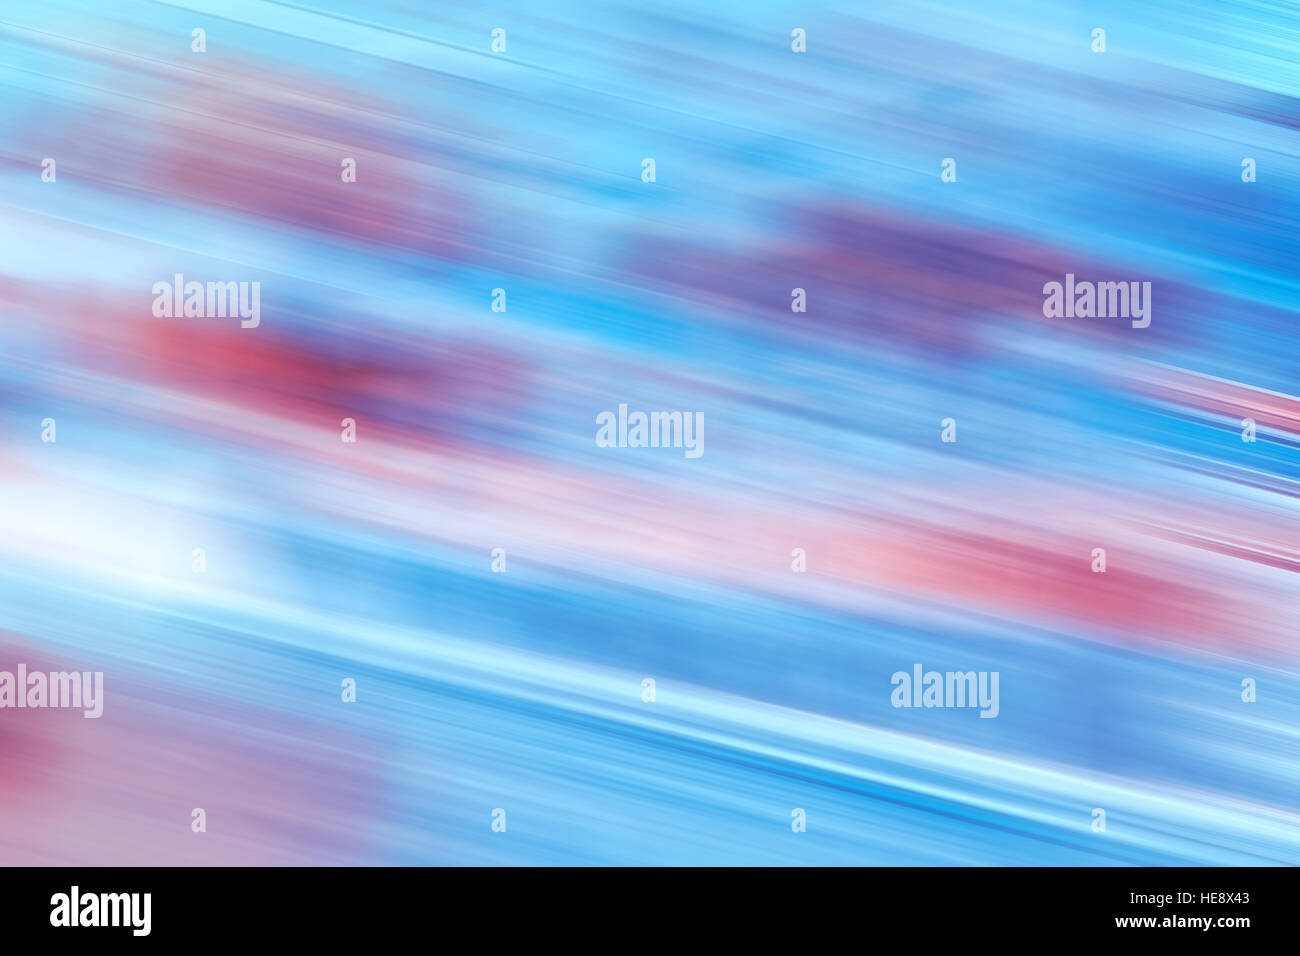 Motion blurred abstract blue and red background or wallpaper. Stock Photo